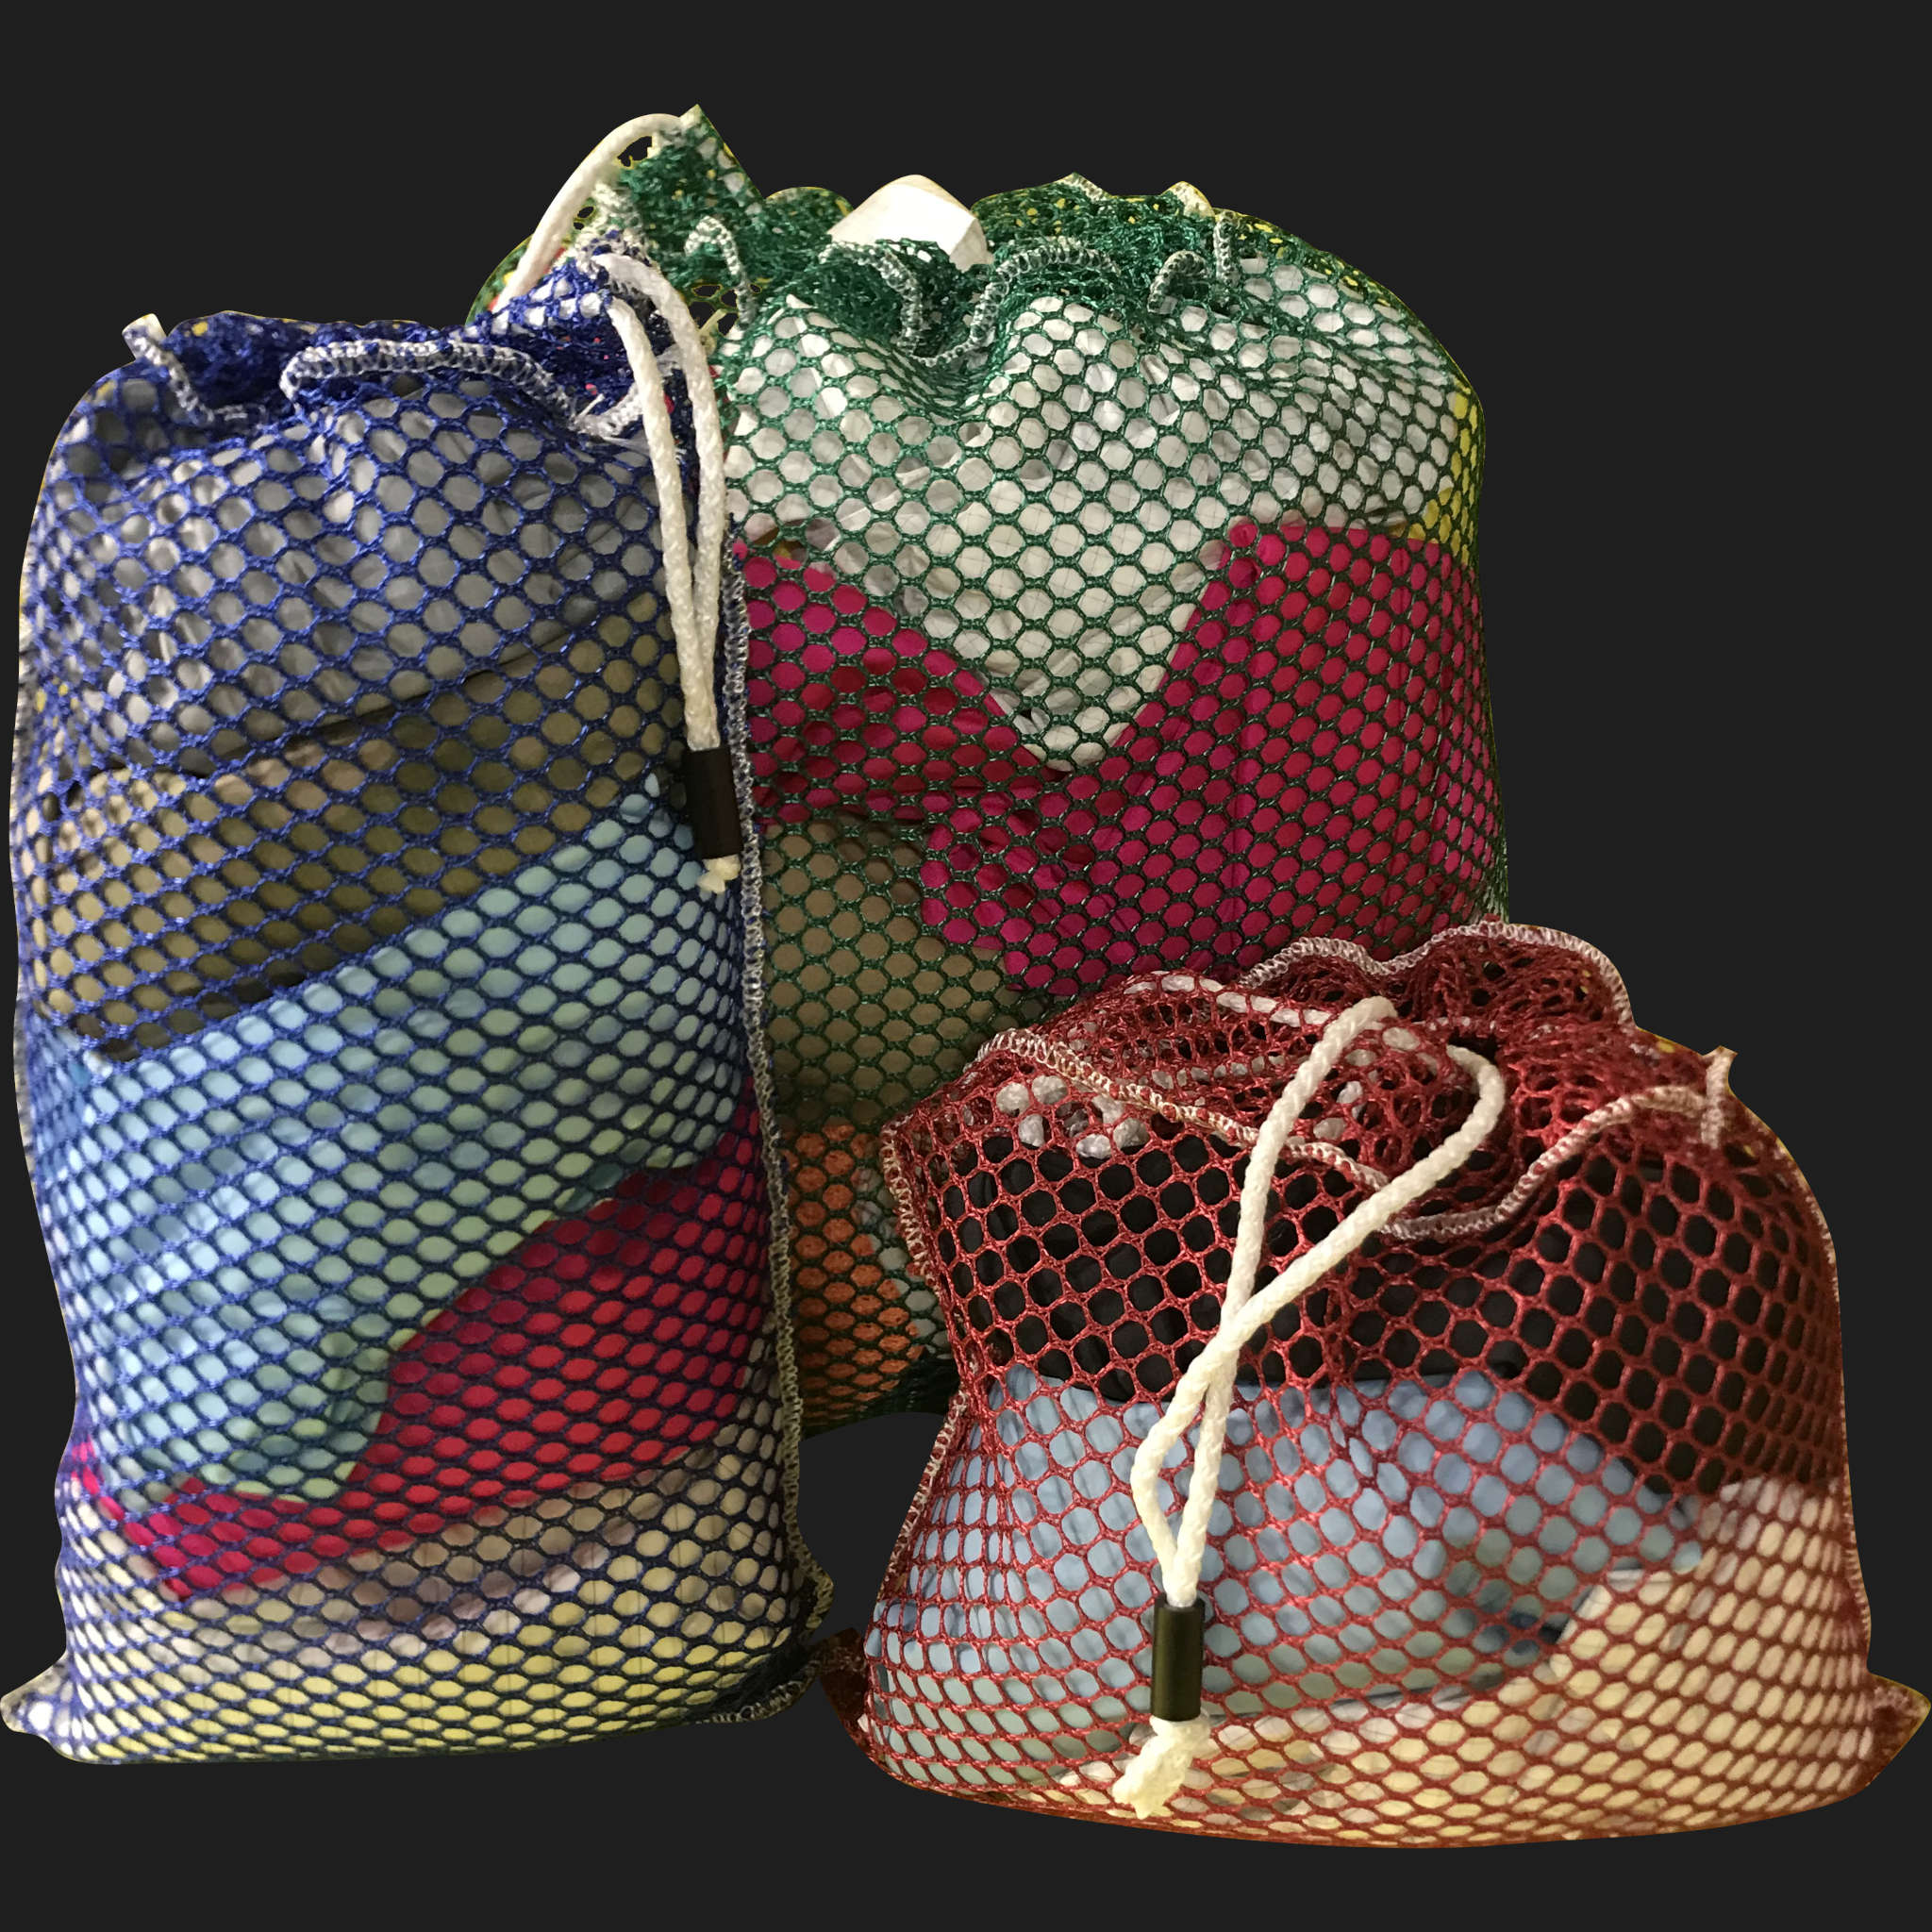 50" x 66" Customized Mesh-Net-Laundry Bags Heavy Duty with Cord and barrellock closure